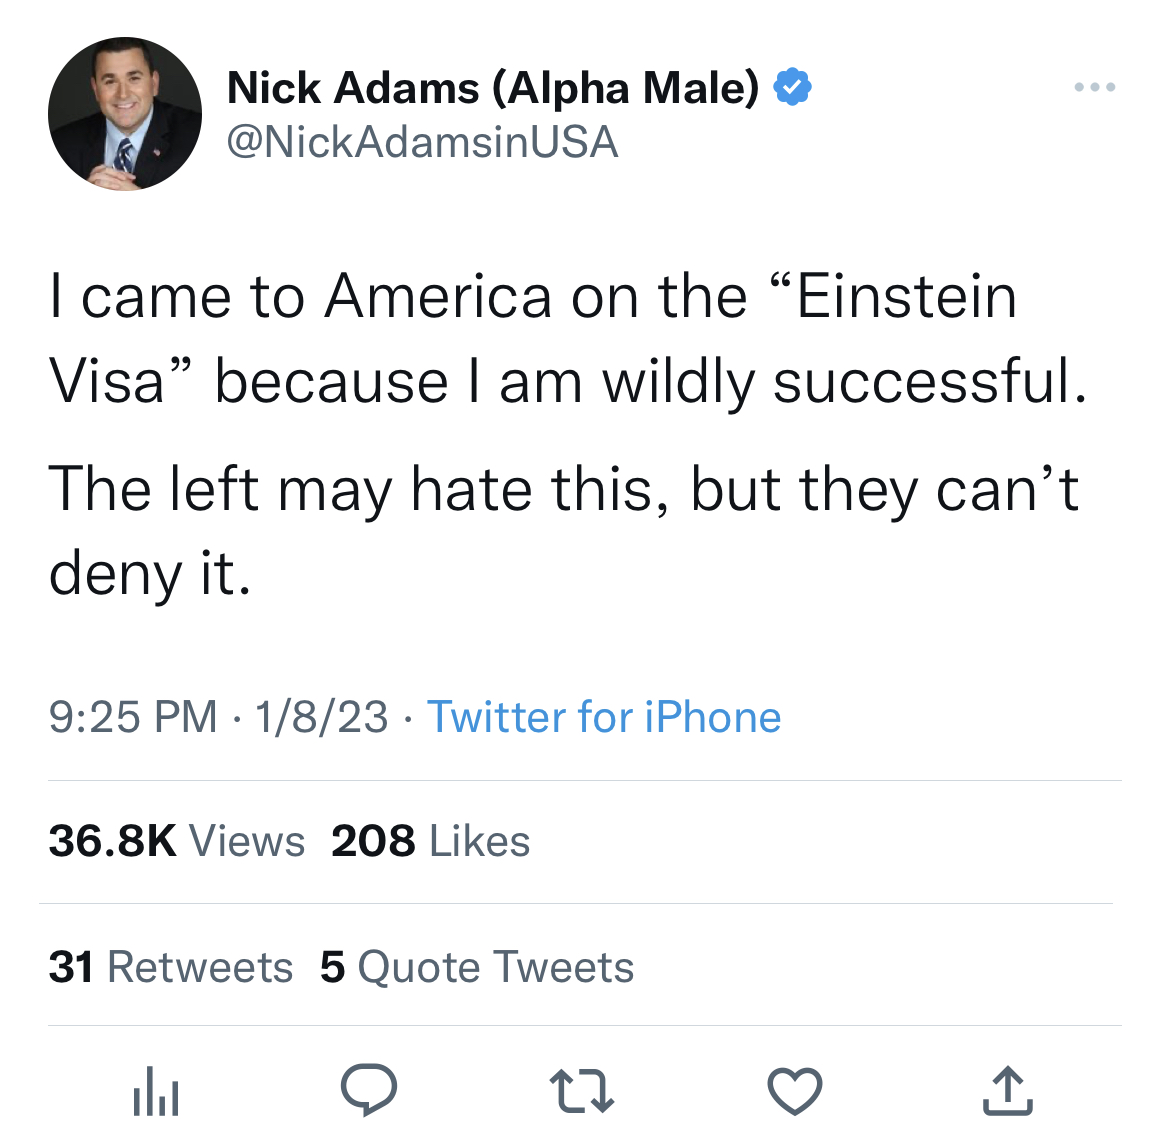 nick adams unhinged tweets - pizza hut twitter fails - Nick Adams Alpha Male Usa I came to America on the "Einstein Visa" because I am wildly successful. The left may hate this, but they can't deny it. 1823 Twitter for iPhone Views 208 31 5 Quote Tweets a